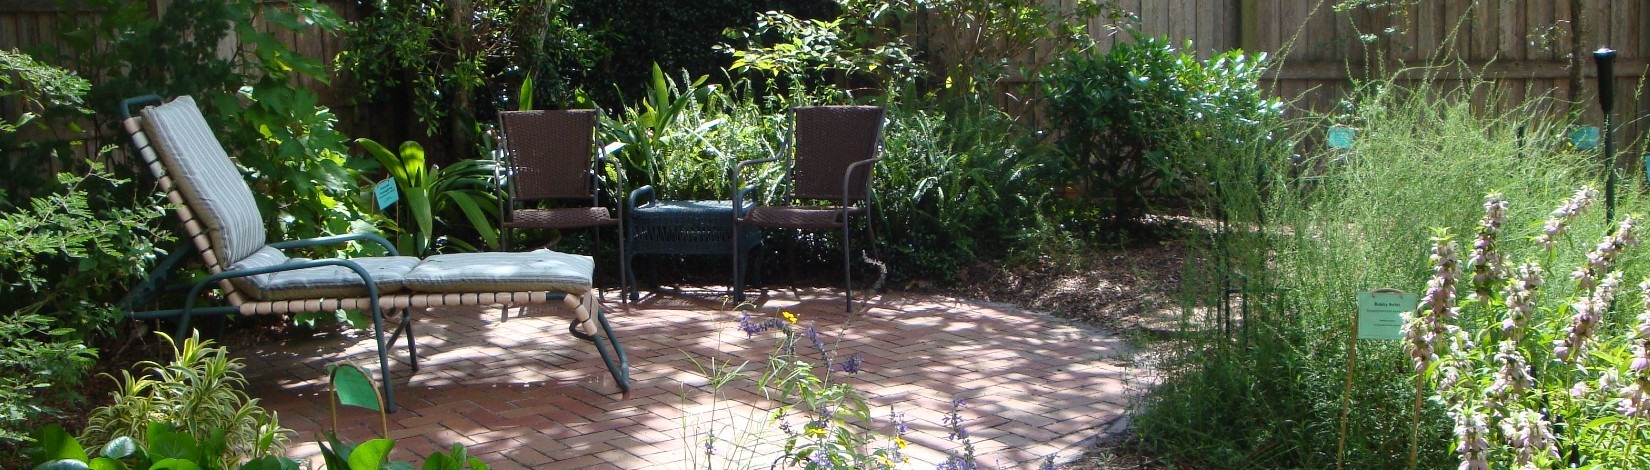 landscaped patio with chairs